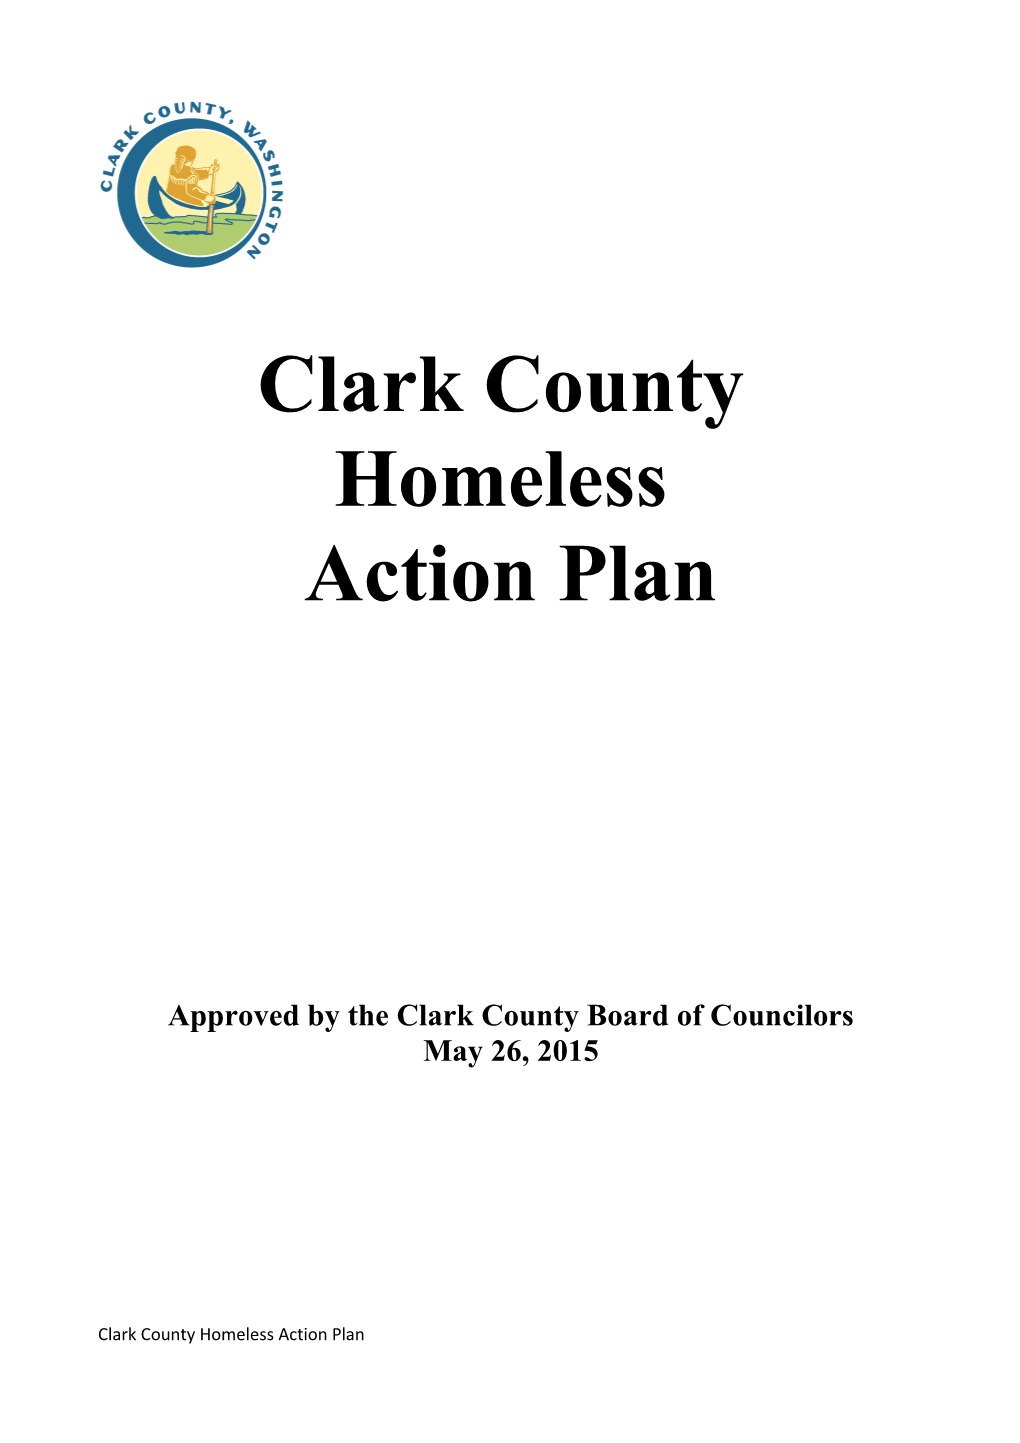 Approved by the Clark County Board of Councilors